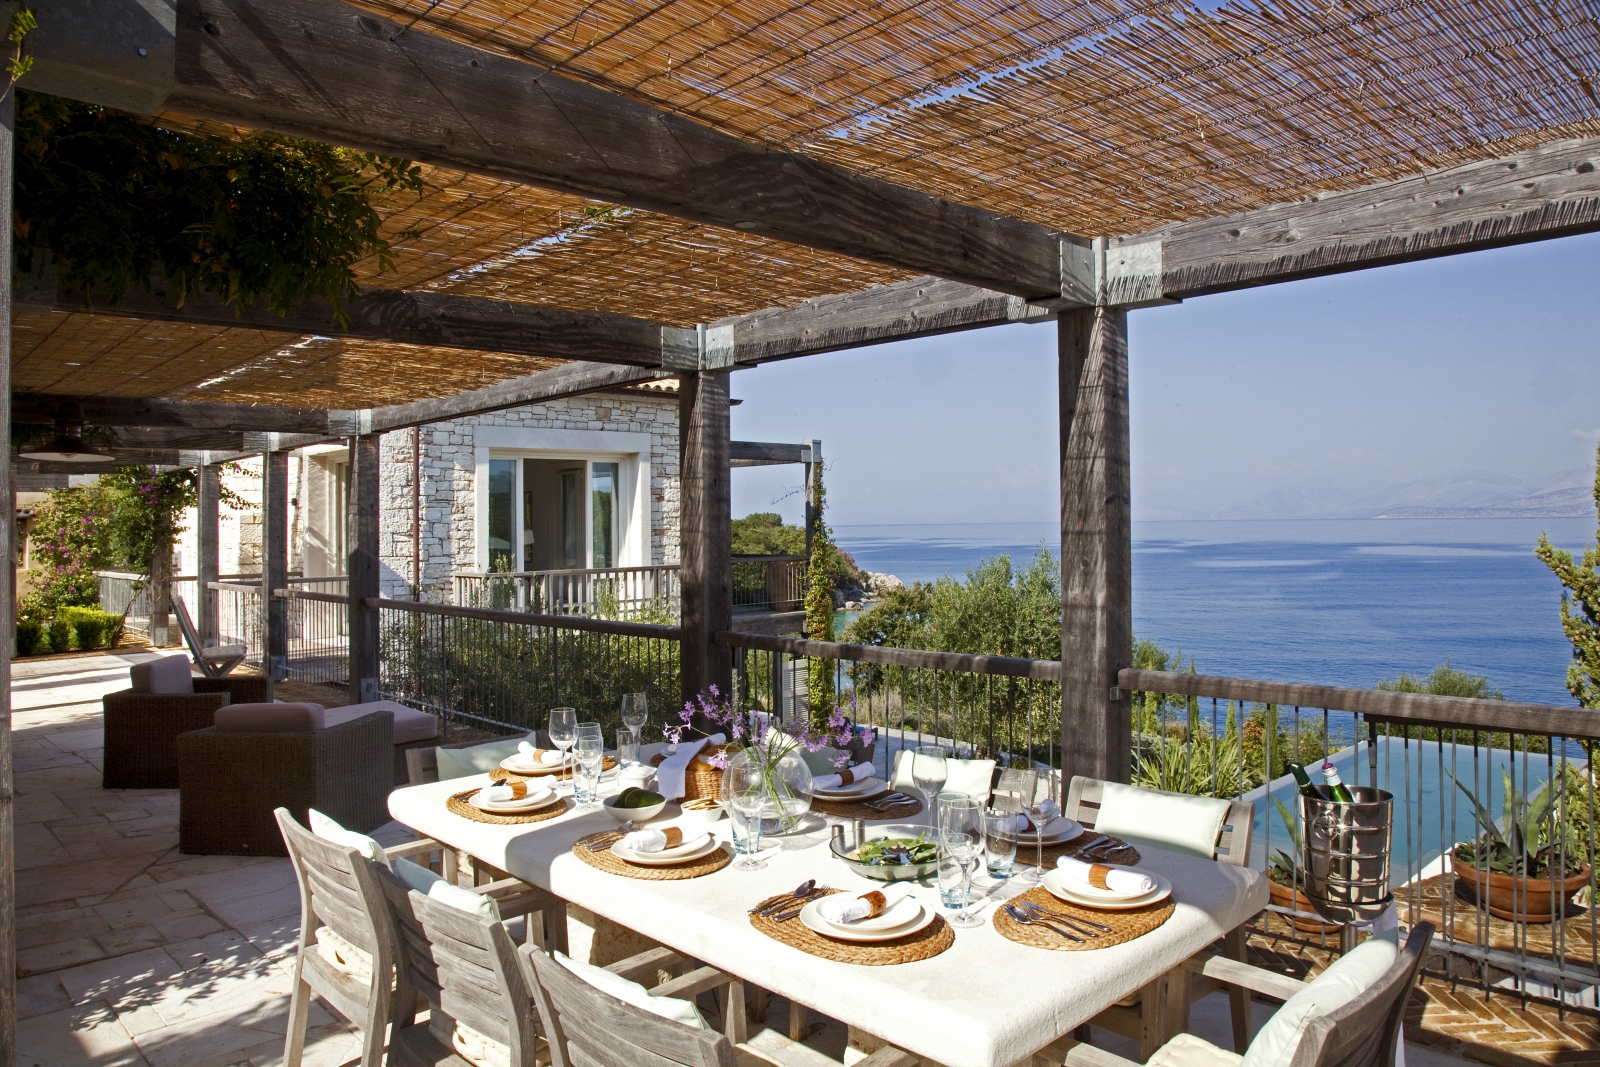 Covered balcony with table, chairs, crockery, comfy armchairs & view of pool and sea at the Odysseus Estate on Corfu, Greece